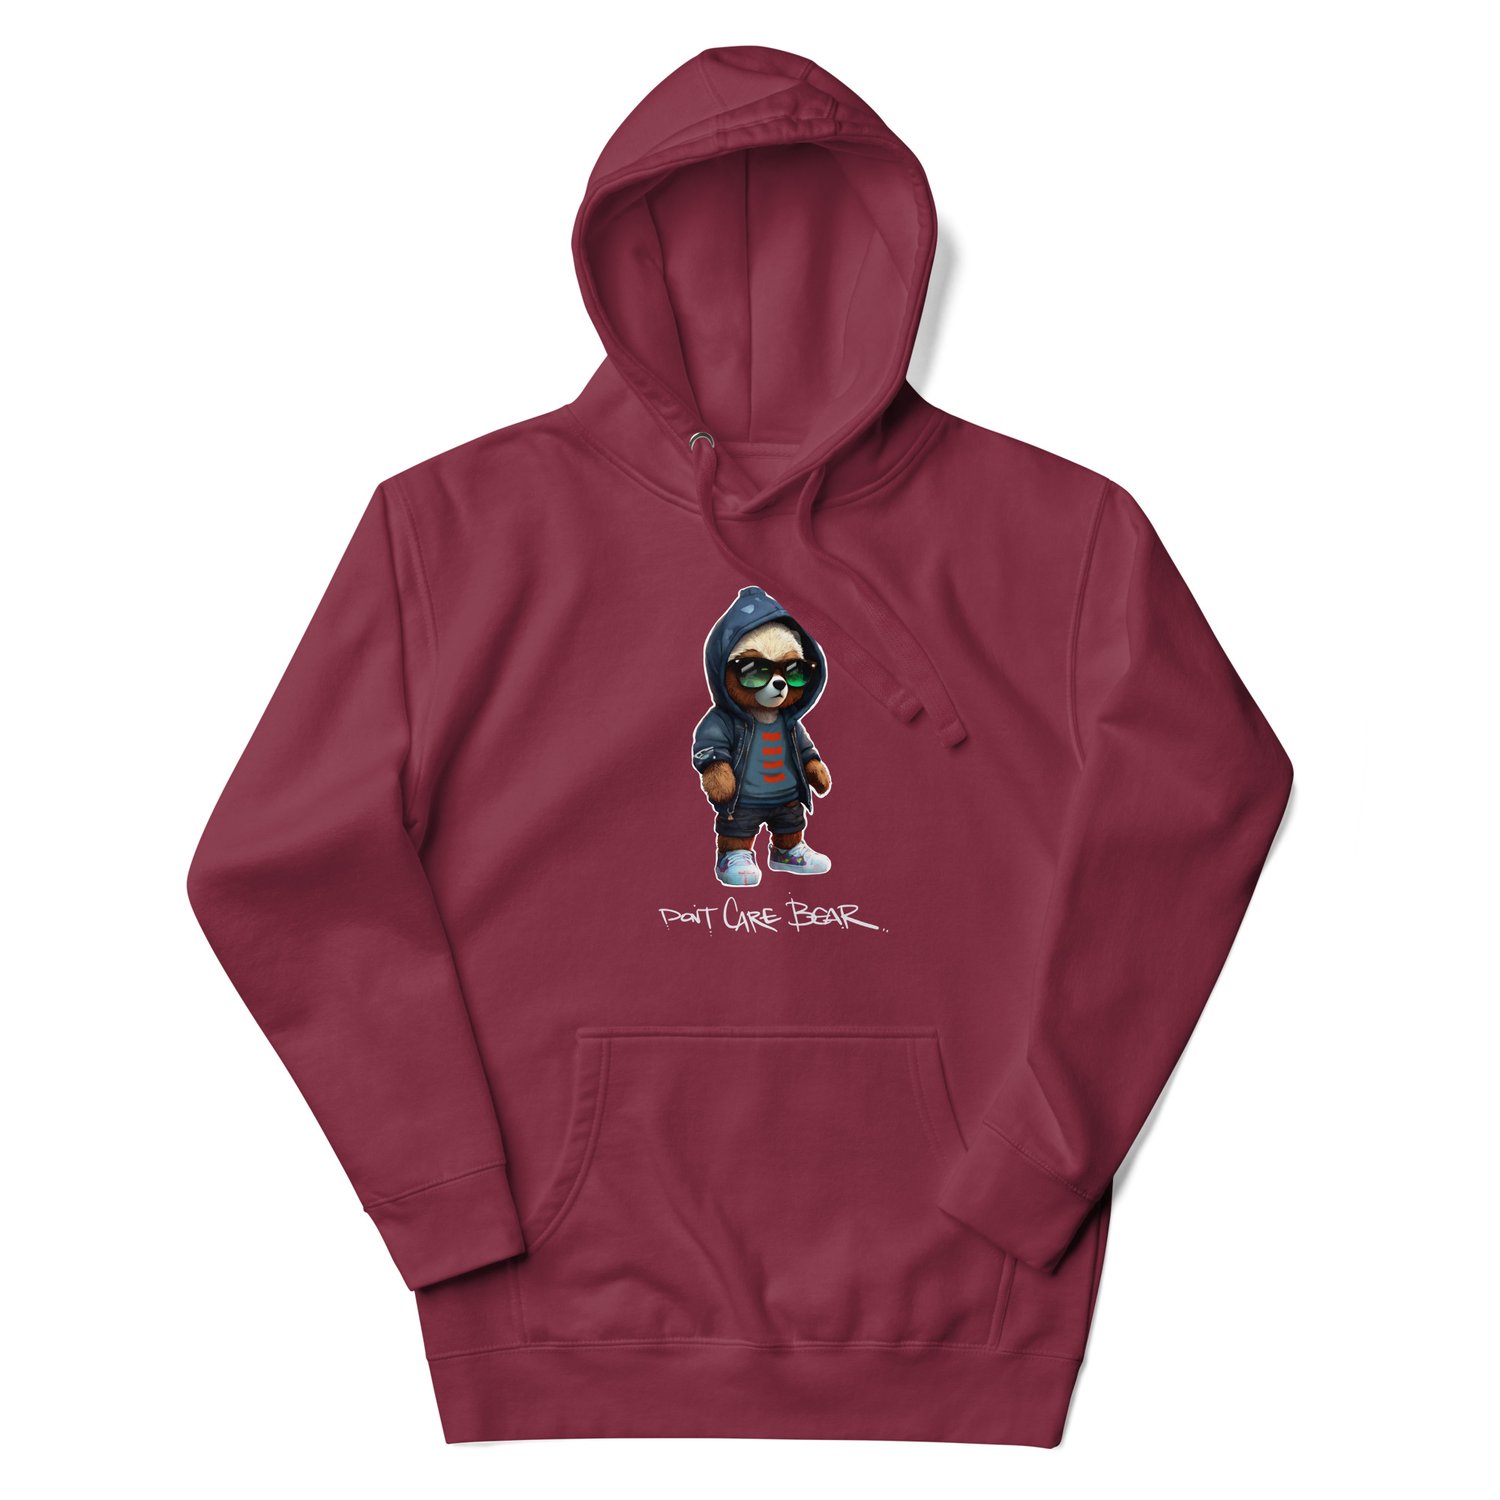 Image of Unisex "Don't Care Bear" Hoodie